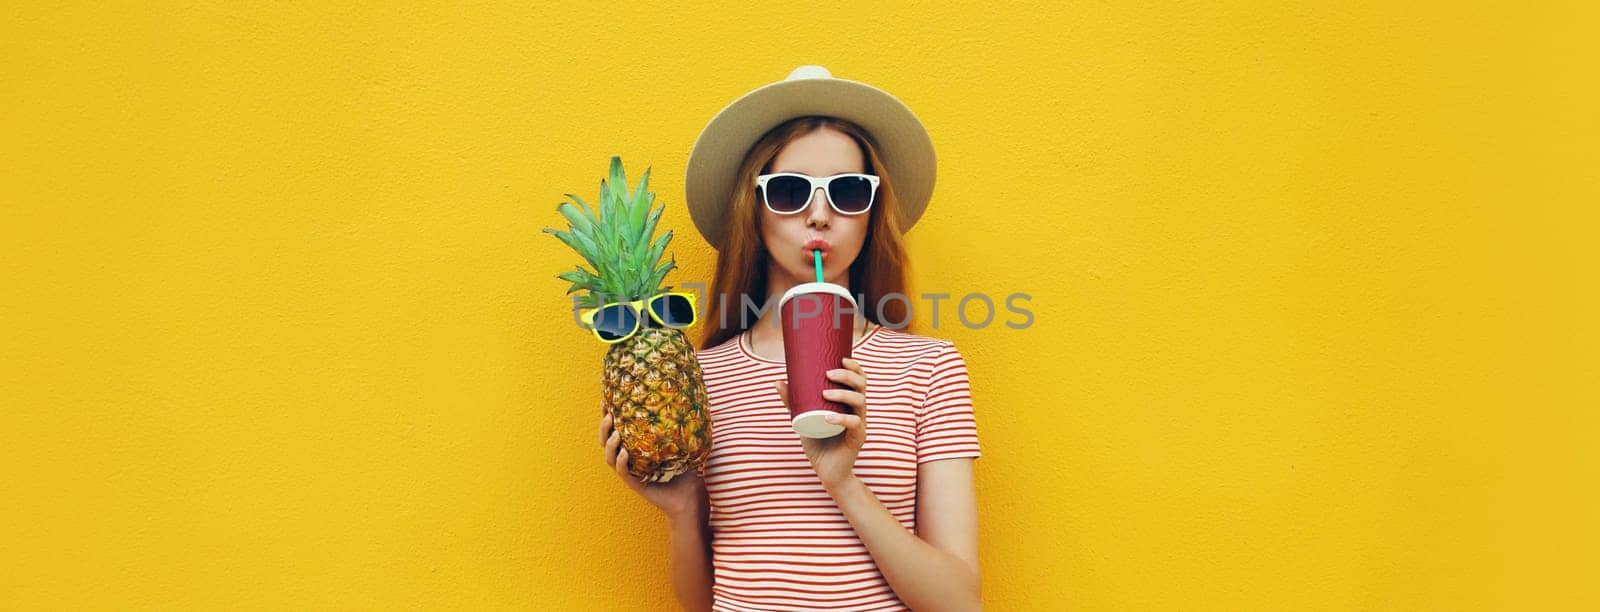 Summer bright portrait of stylish young woman drinking fresh juice holding pineapple fruit in straw hat, sunglasses on colorful yellow studio background